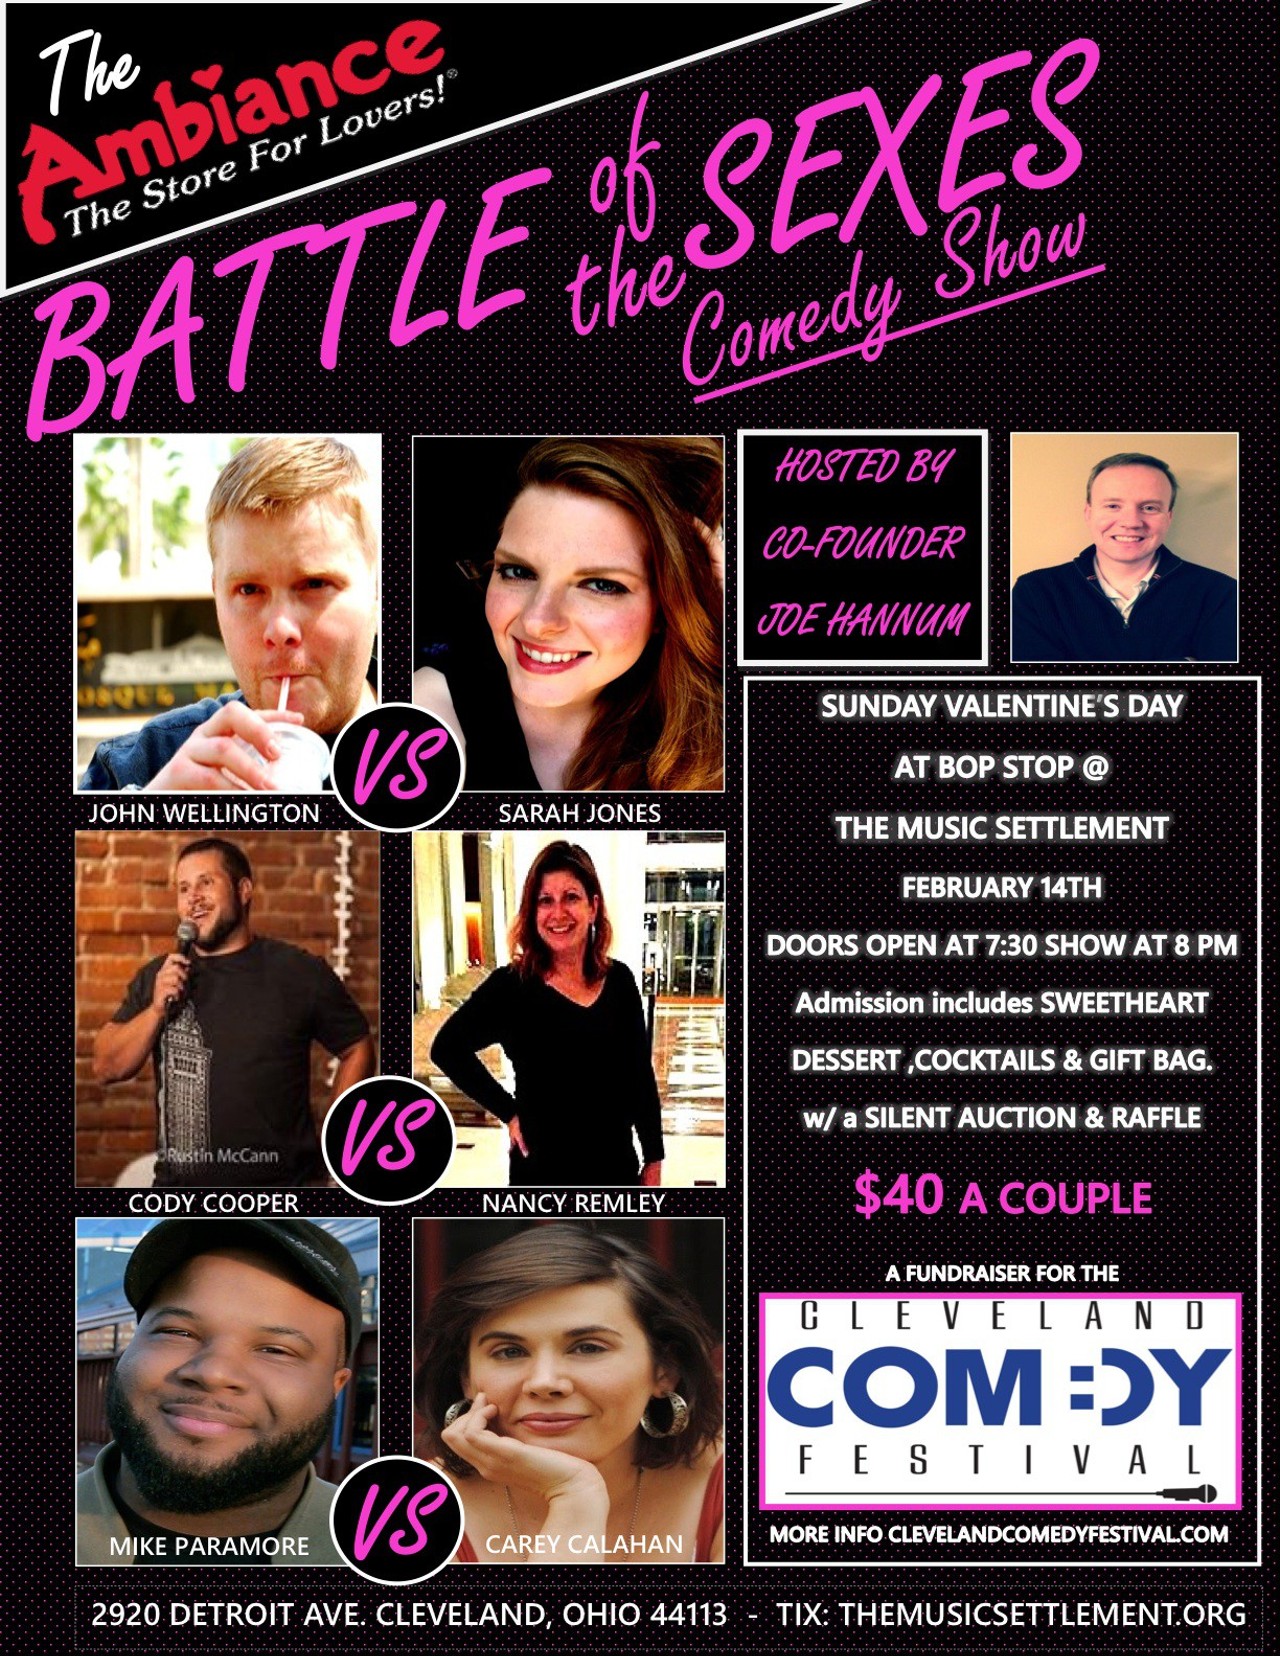 Battle of the Sexes Sun., Feb. 14 
Romance doesn&#146;t have to be serious. To celebrate St. Valentine&#146;s Day, the Cleveland Comedy Festival and the Bop Stop have teamed up to present an event they call Battle of the Sexes. The event will include winning jokes submitted to the Ambiance "Best Sex Jokes" contest. Fans of Ambiance who submitted the winning jokes will be in attendance. Comedians in the &#147;battle&#148; on the men&#146;s side include John Wellington, Cody Cooper and Mike Paramore. Sarah Jones, Carey Callahan, and Nancy Remley will offer their comedic take on relationships. The event will serve as a fundraiser for the nonprofit Cleveland Comedy Festival, which holds its annual festival each November. There also will be a silent auction featuring Playhouse Square tickets, wine gift baskets, gift cards for couples date nights, and numerous other items. Doors open at 7:30 p.m. at the Bop Stop. Tickets are $40 per couple with dessert and a cocktail included. (Niesel)